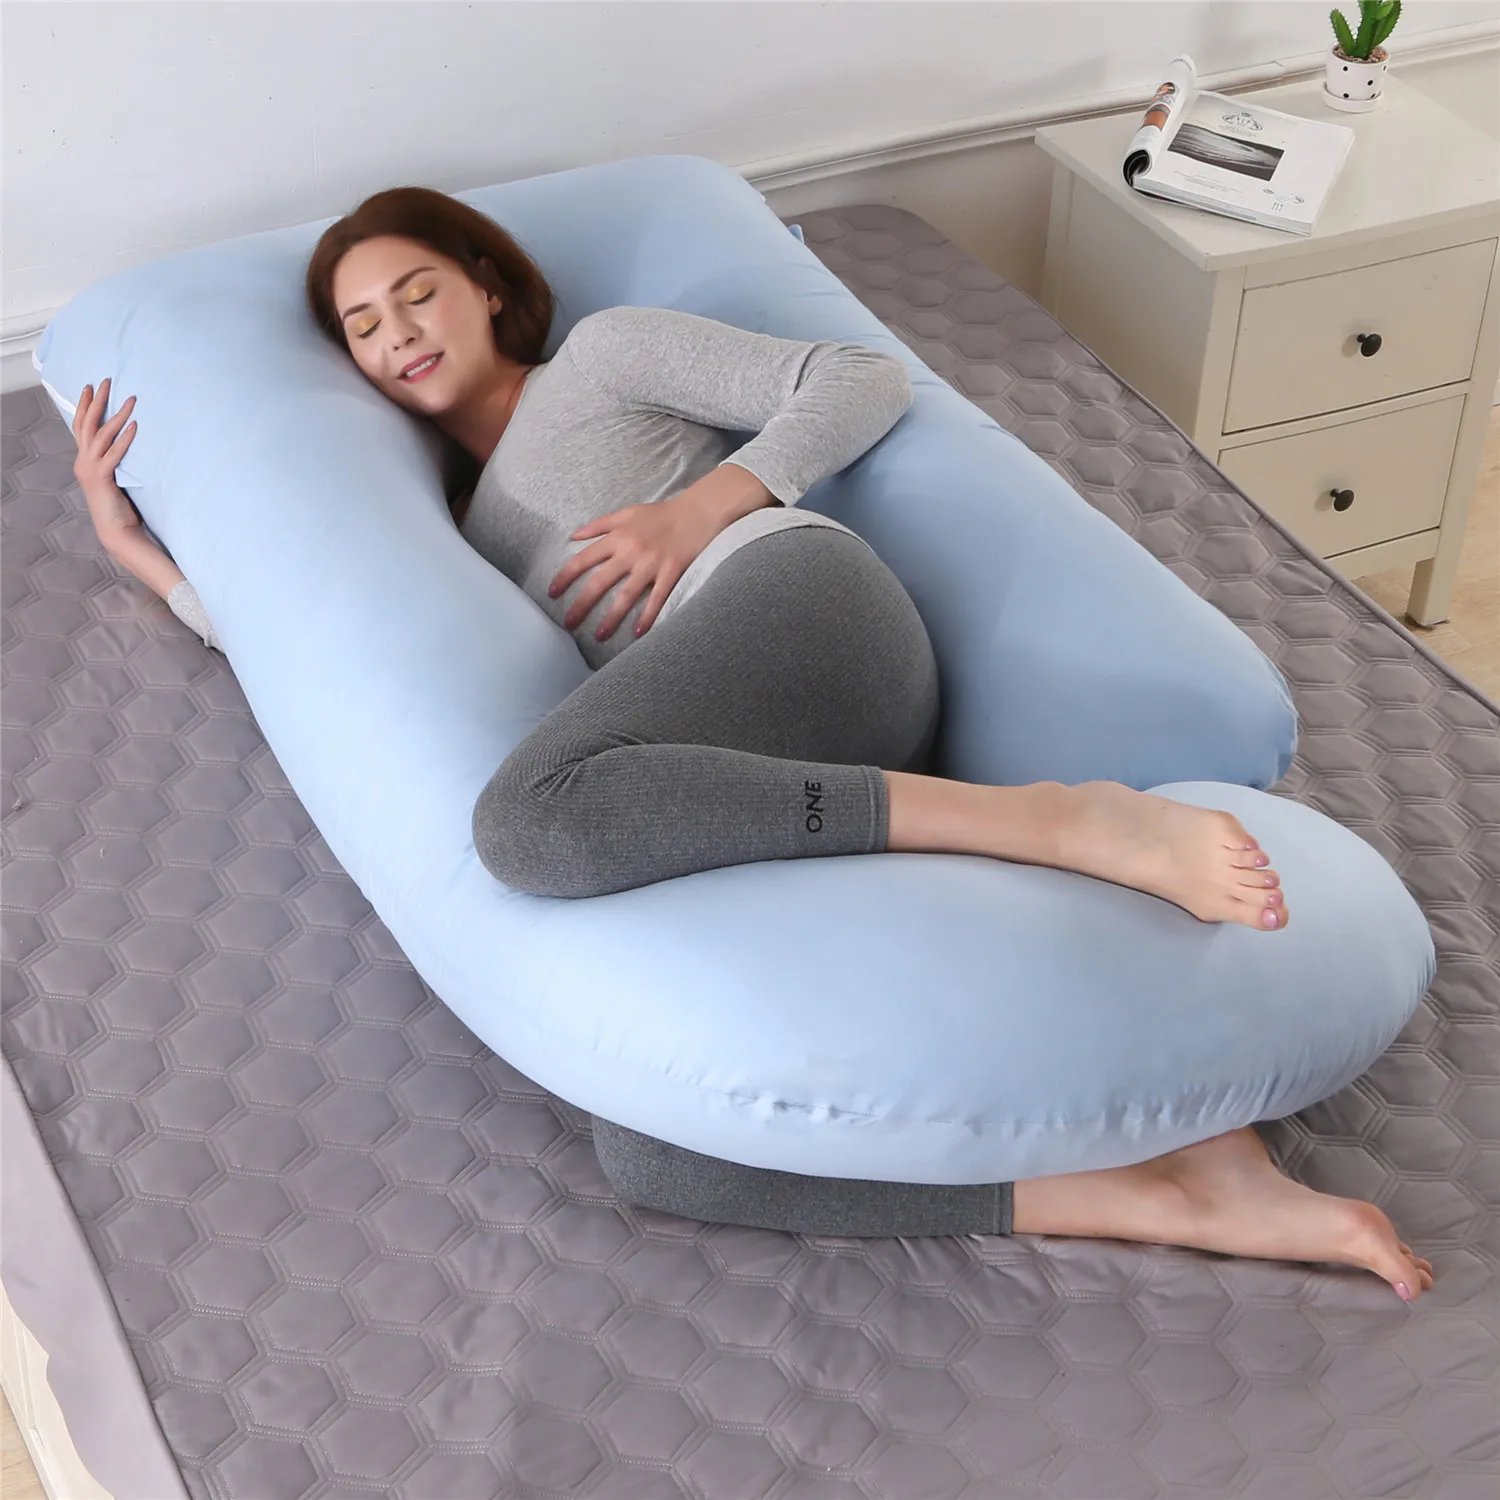 Pregnancy Pillows For Sleeping Maternity Pillow For Pregnant Women U Shaped Side Sleeper